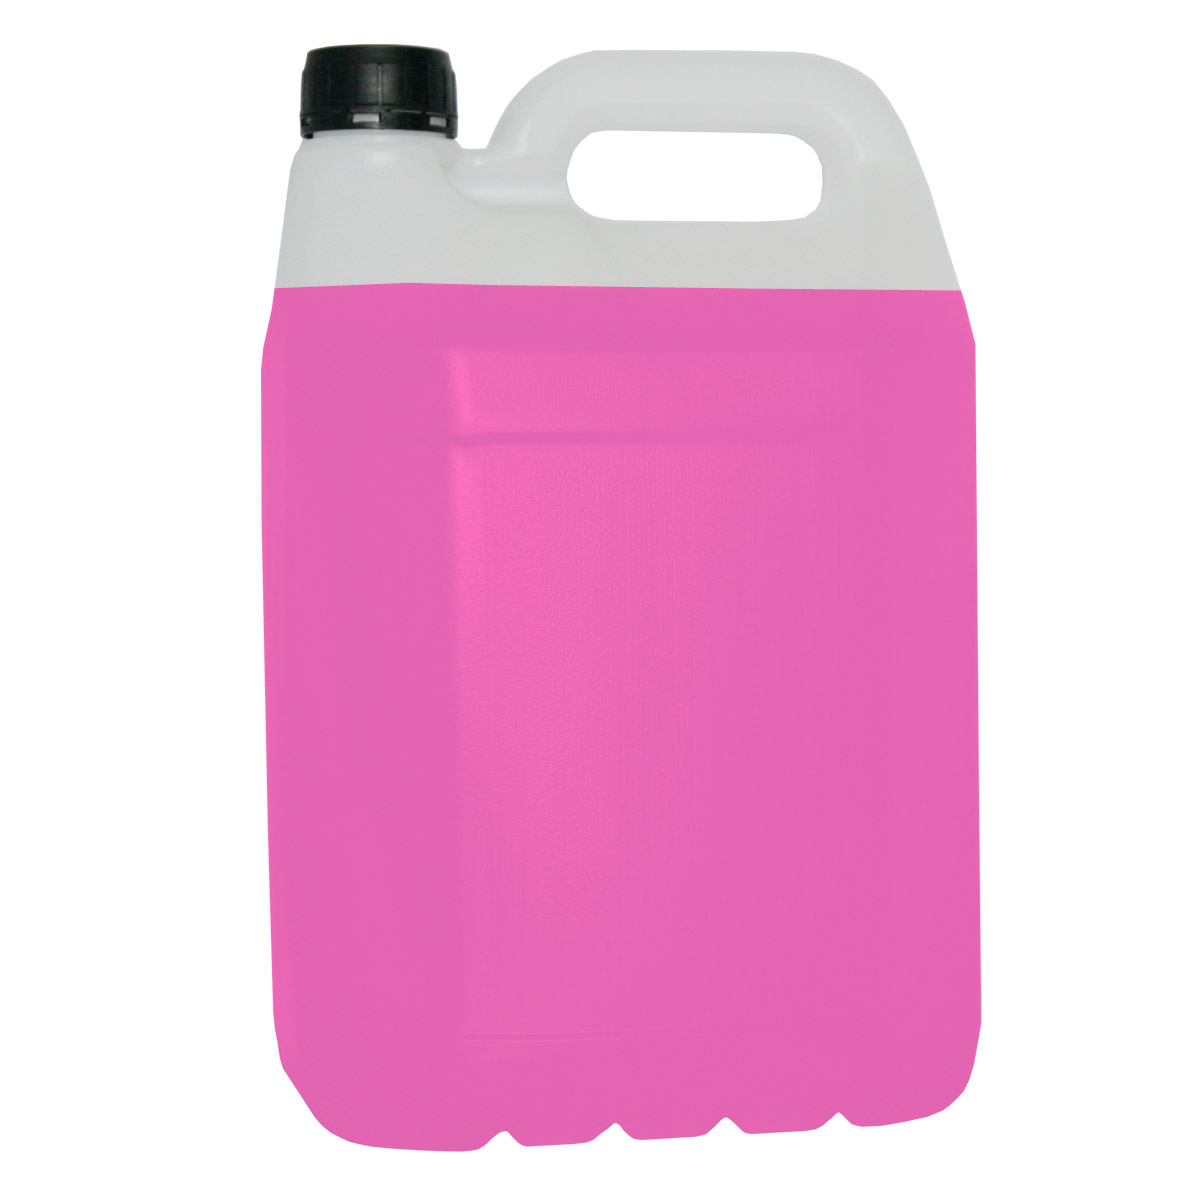 Cleaning fluid for print heads - pink, outside